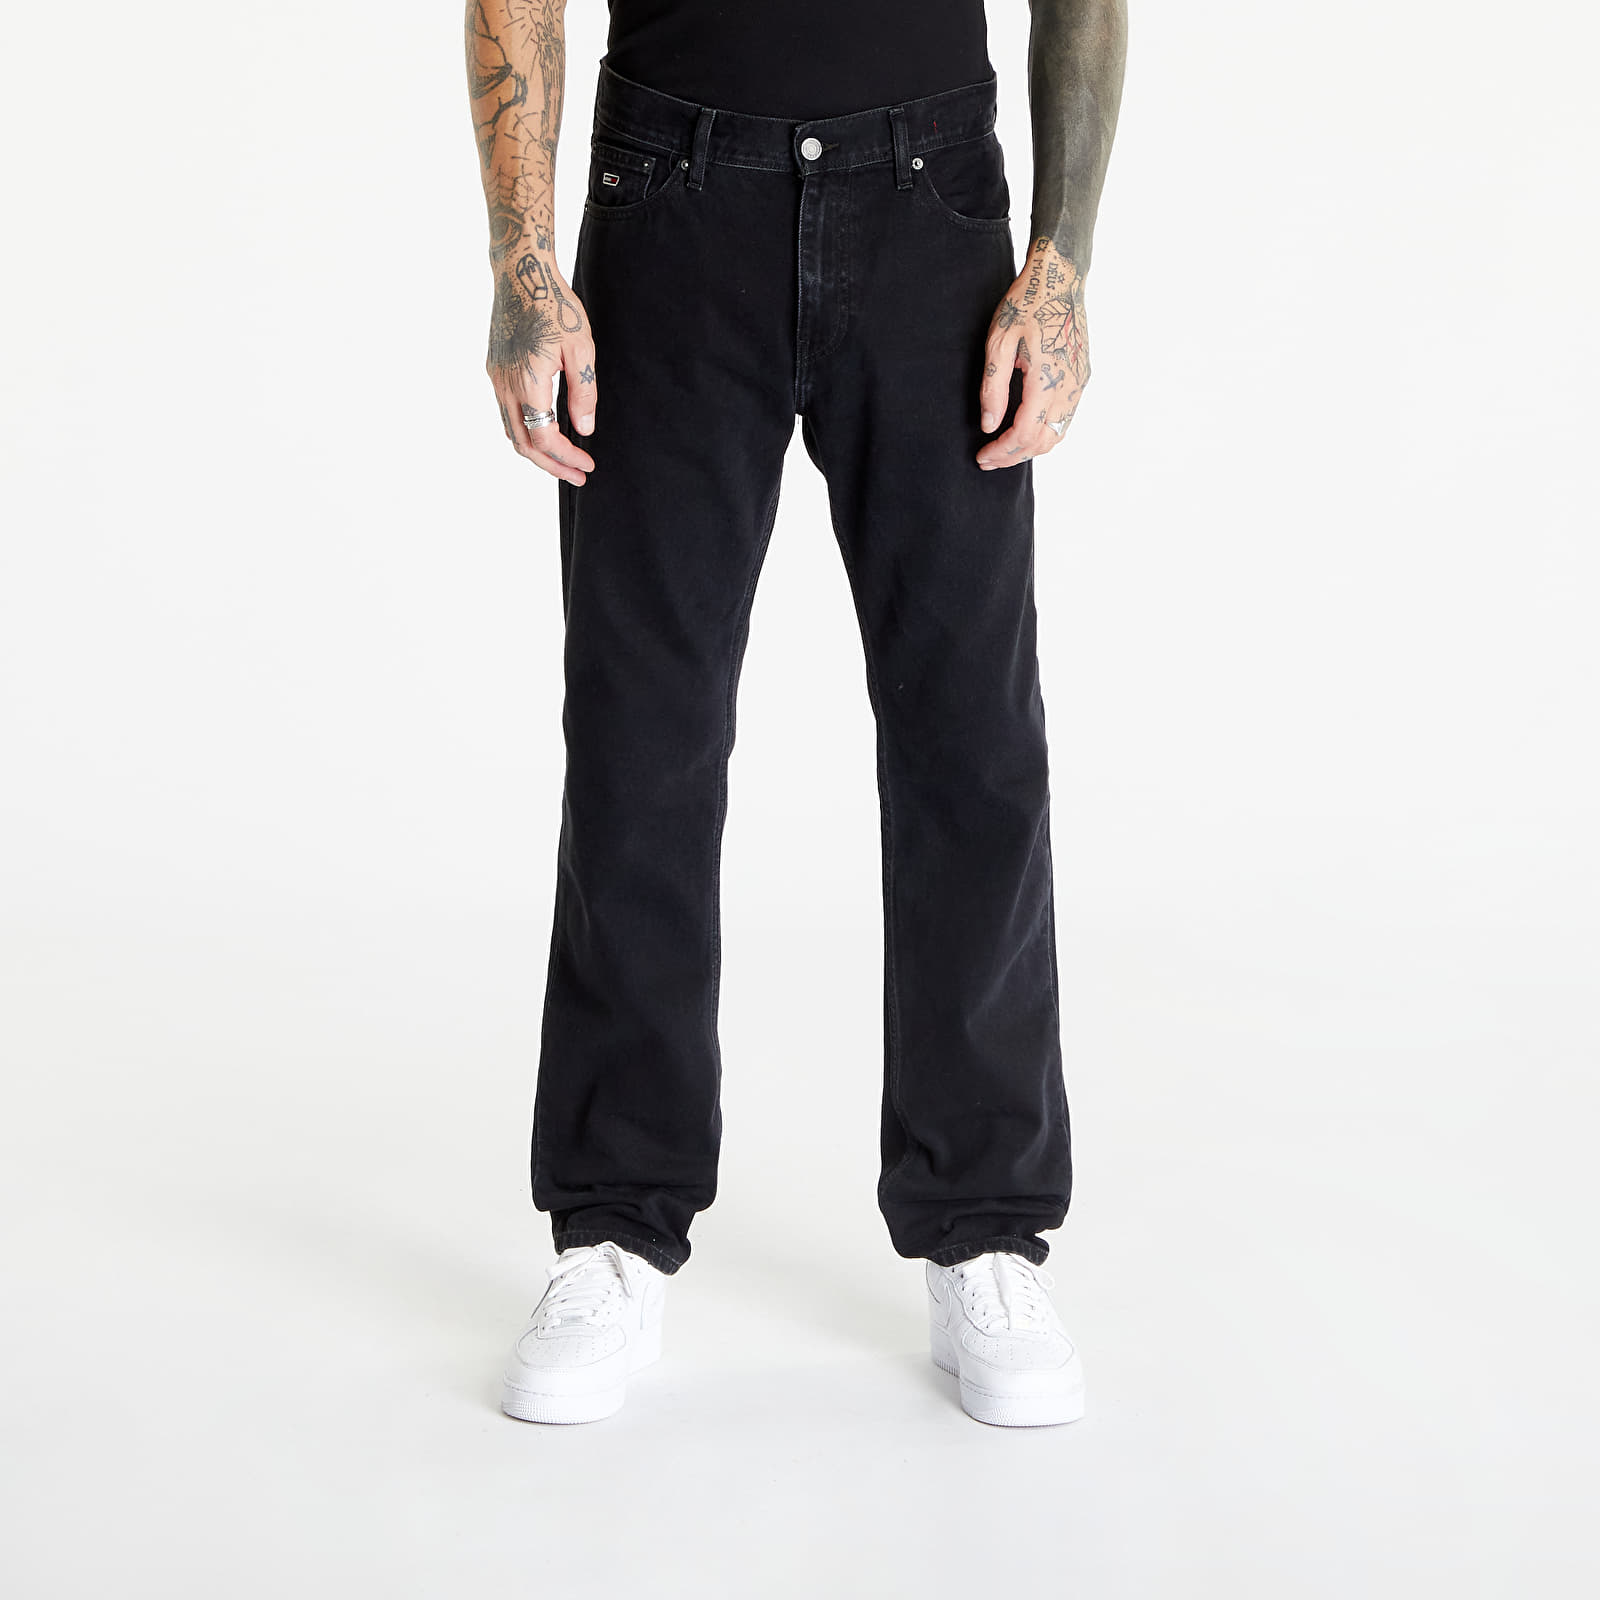 Tommy Hilfiger - Tommy Jeans Ethan Relaxed Straight Jeans Denim Black